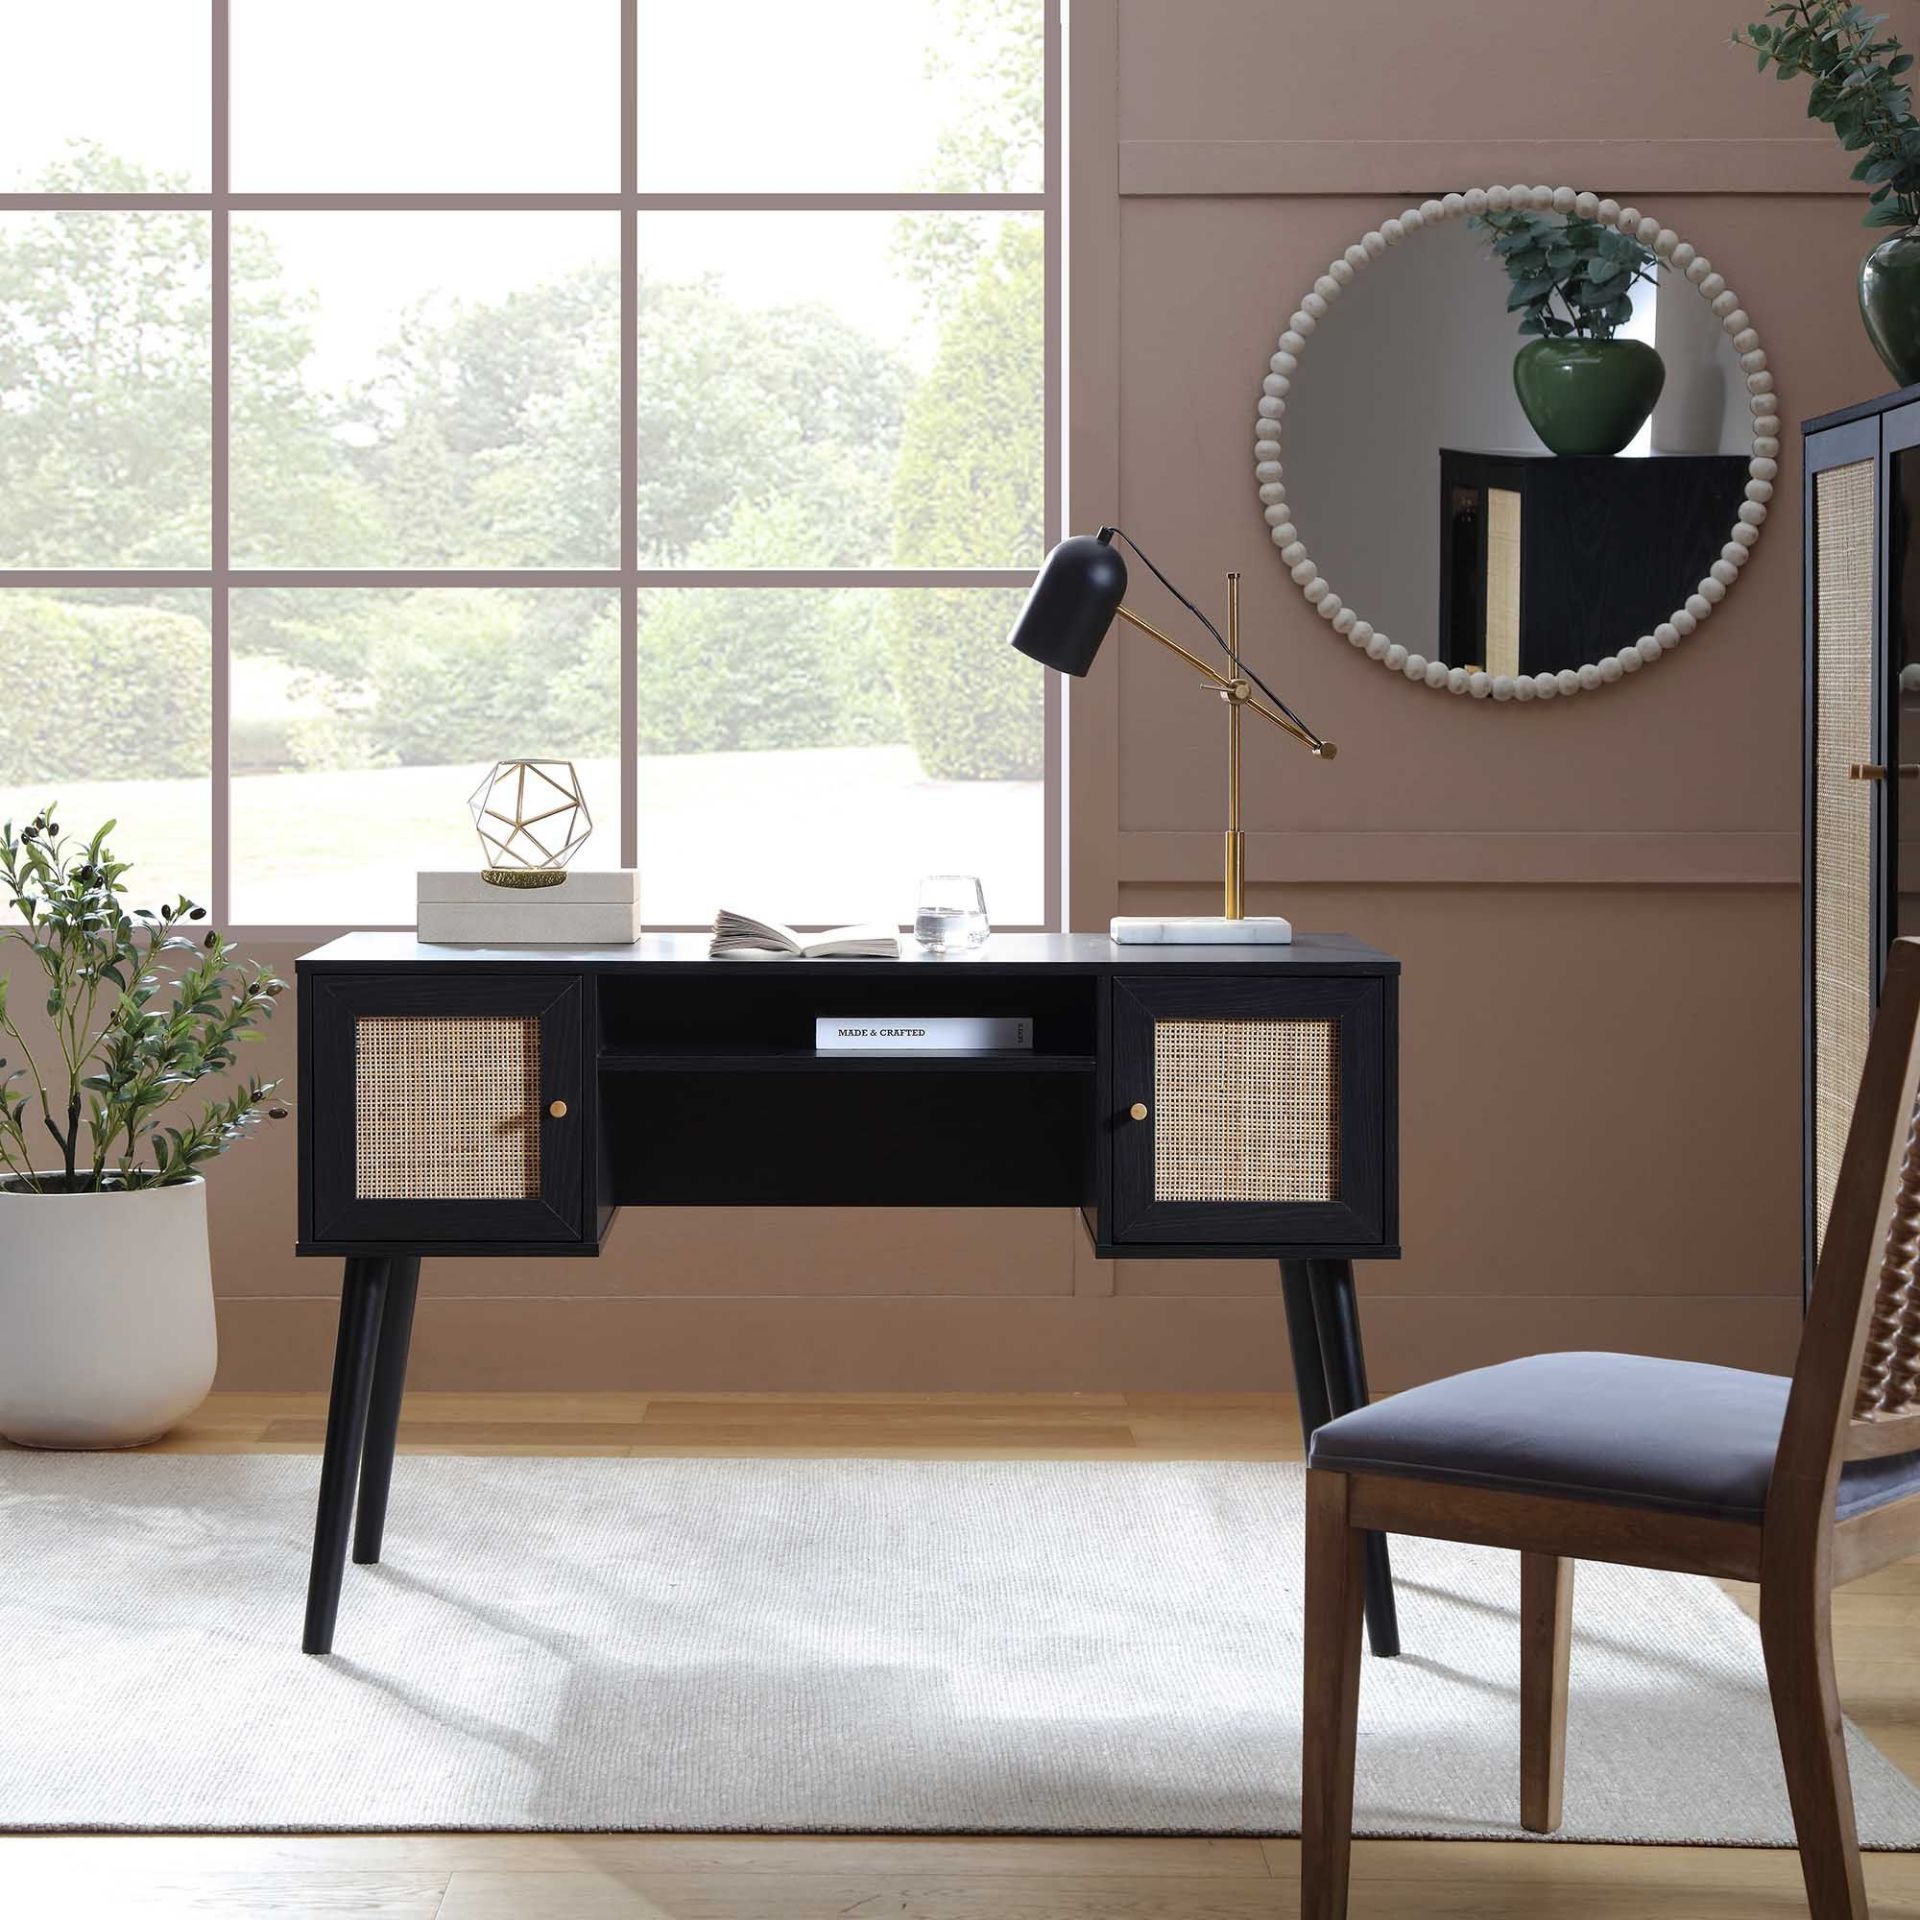 Frances Woven Rattan 2-Door Desk, Black. - ER29. RRP £239.99. Crafted from natural rattan and